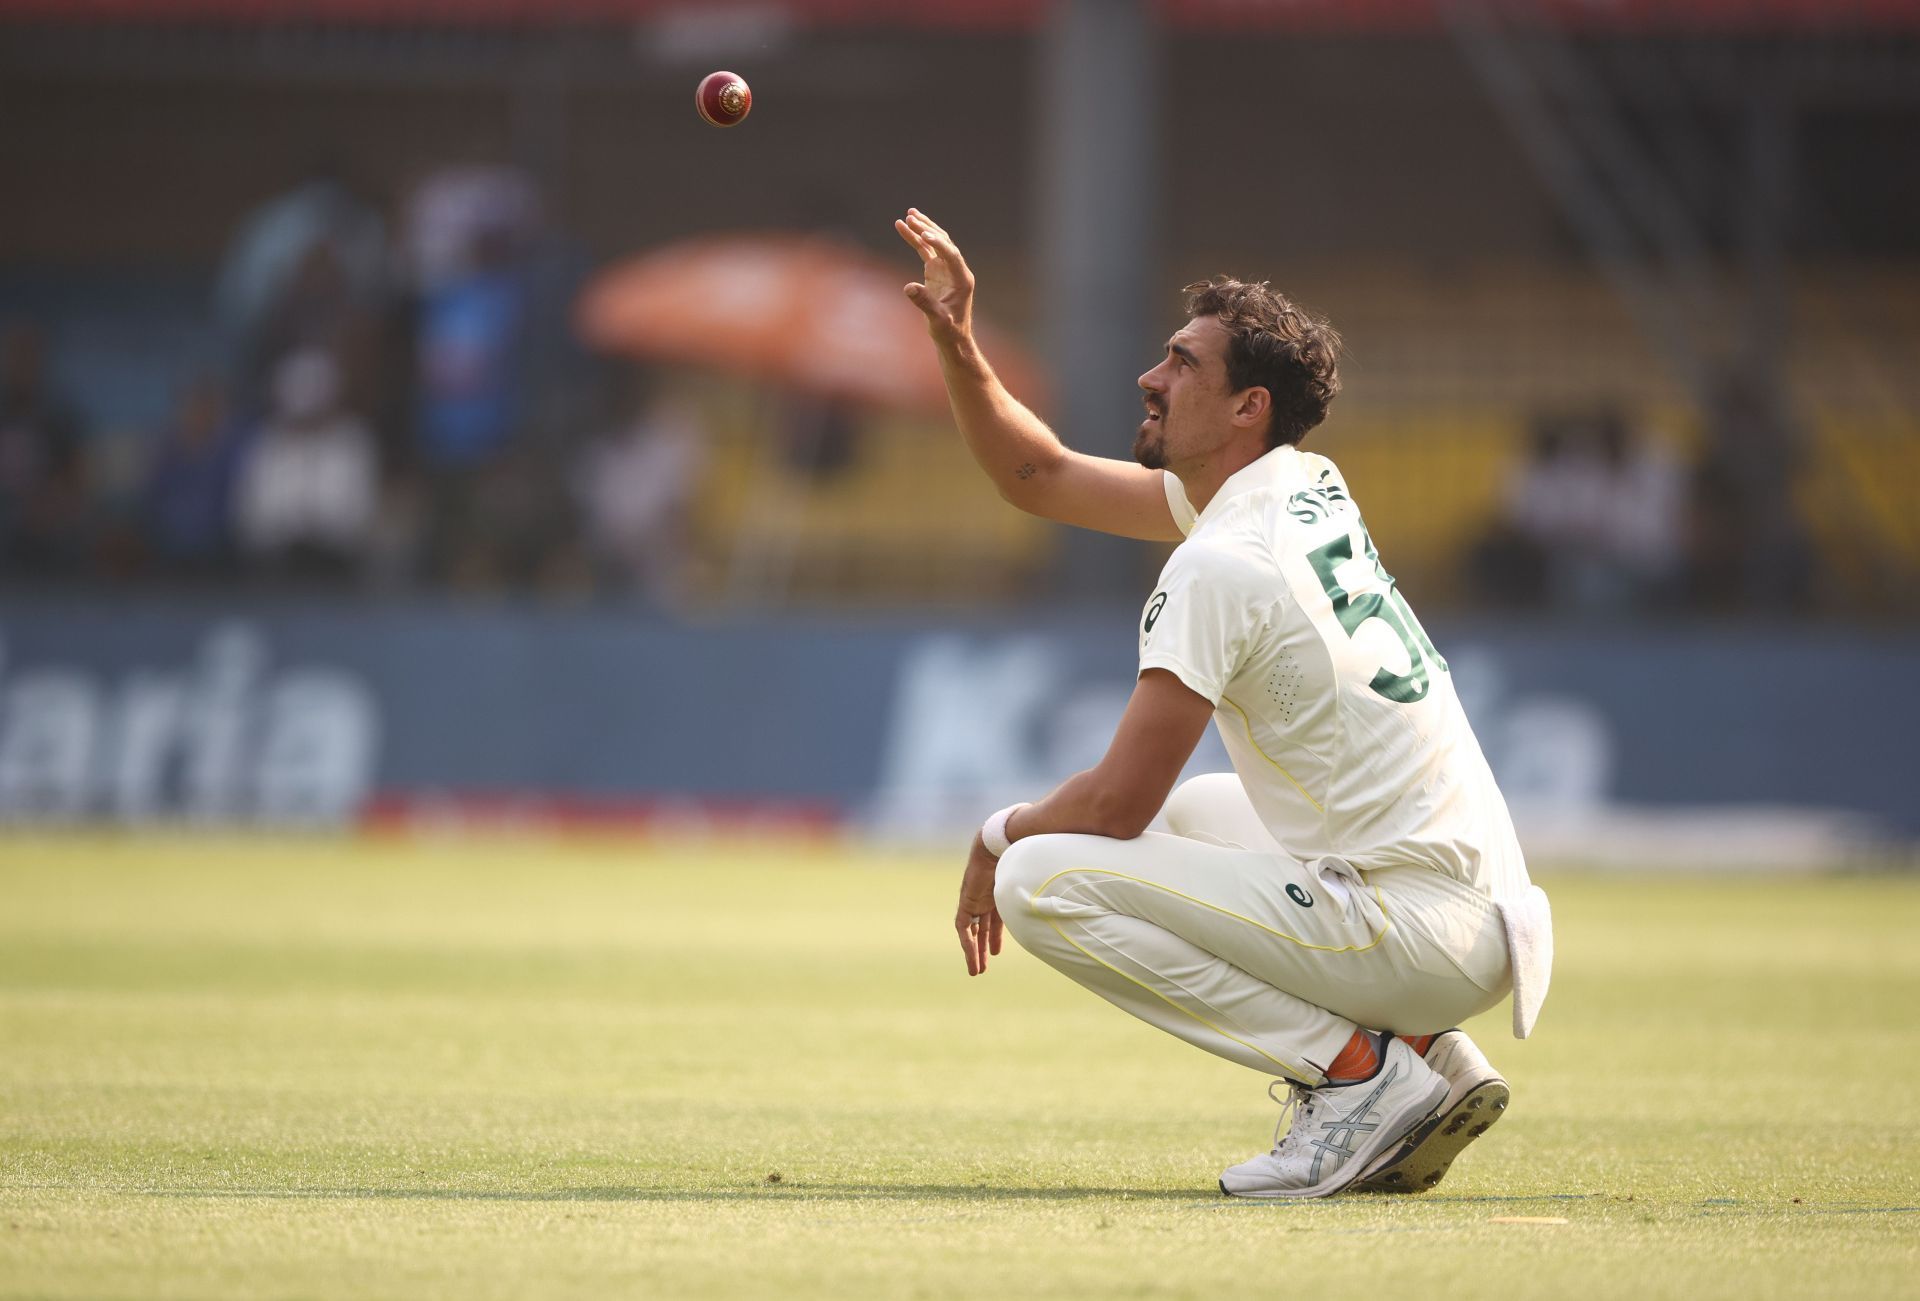 Mitchell Starc does not have a good Test record against India, but that does not make him any less dangerous. (Pic: Getty Images)